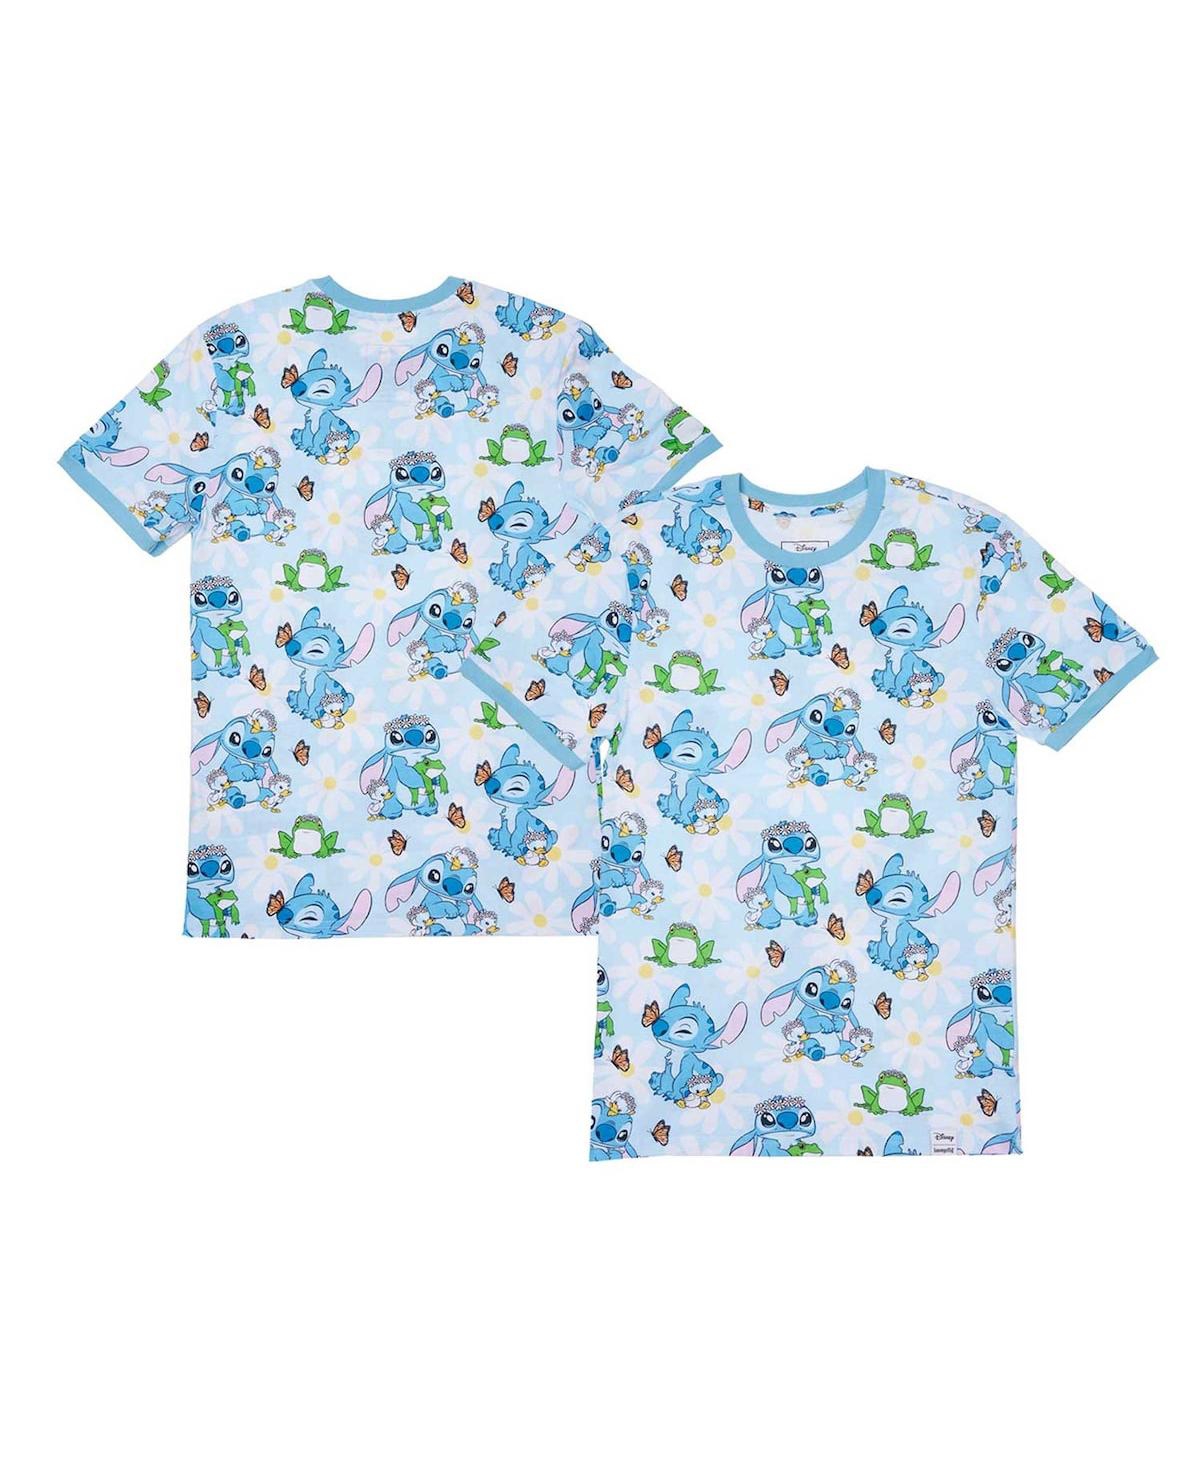 Loungefly Men's And Women's Light Blue Lilo And Stitch Springtime Daisy Allover Print T-shirt